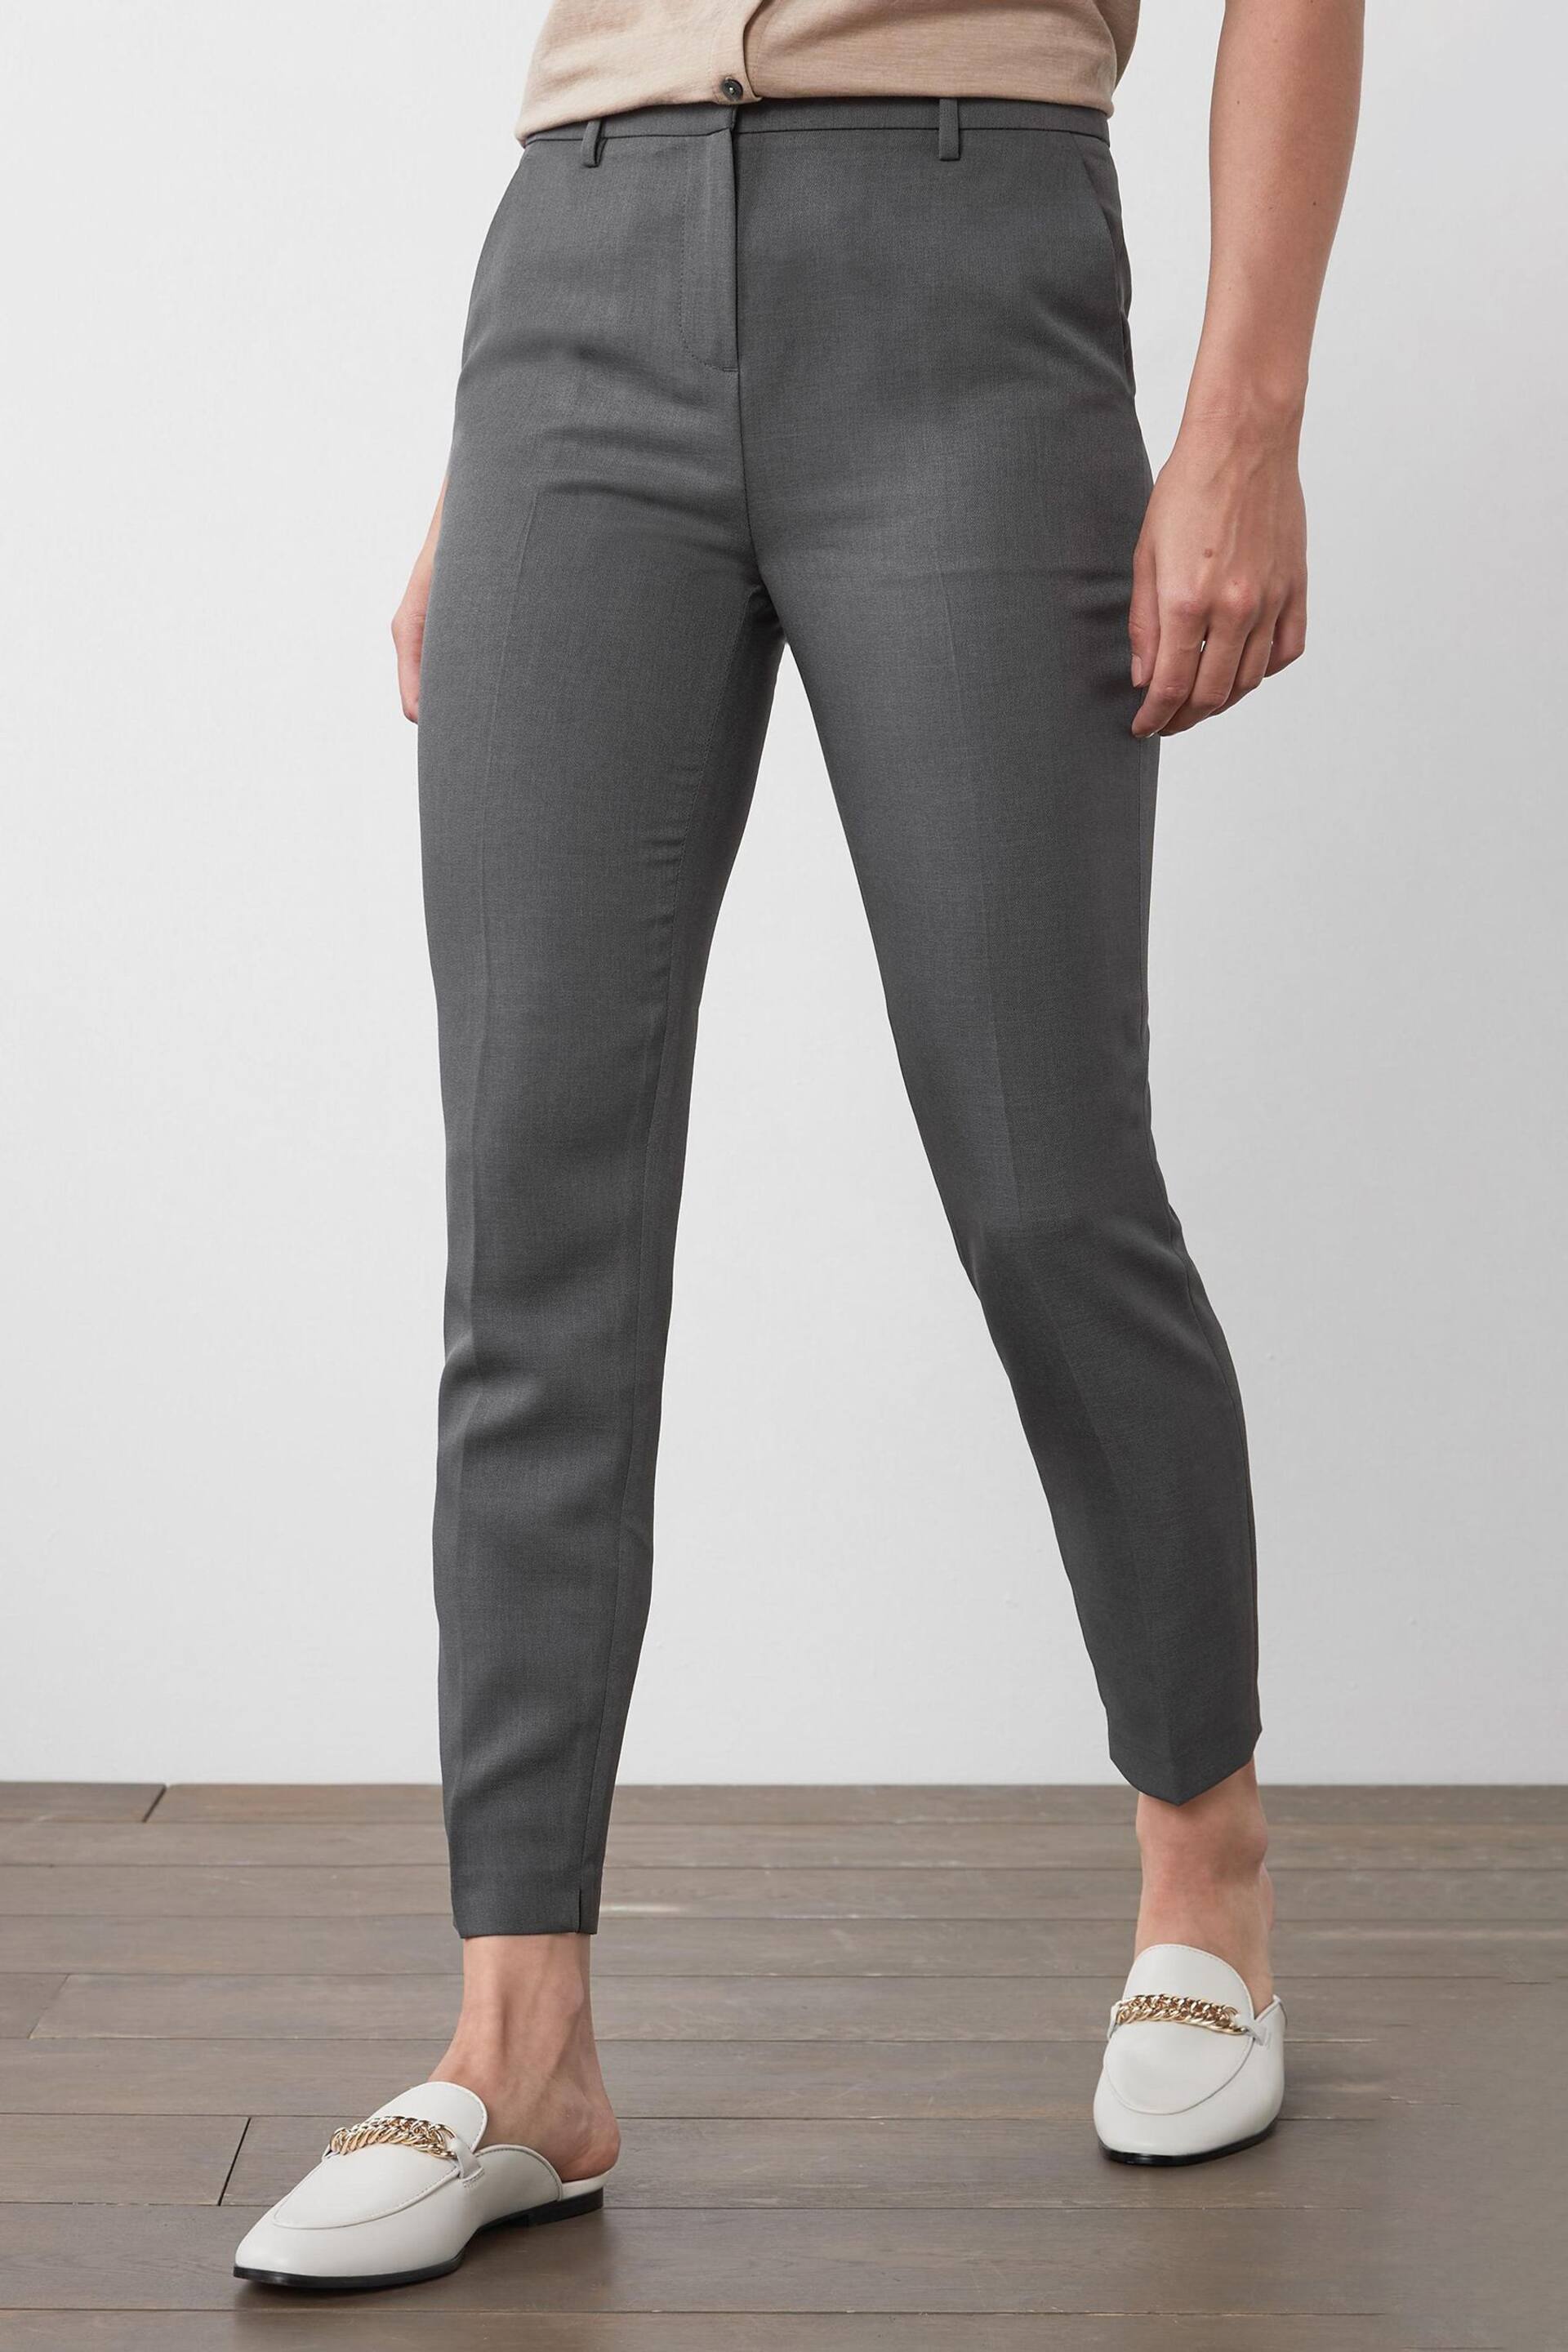 Charcoal Grey Slim Trousers - Image 1 of 5